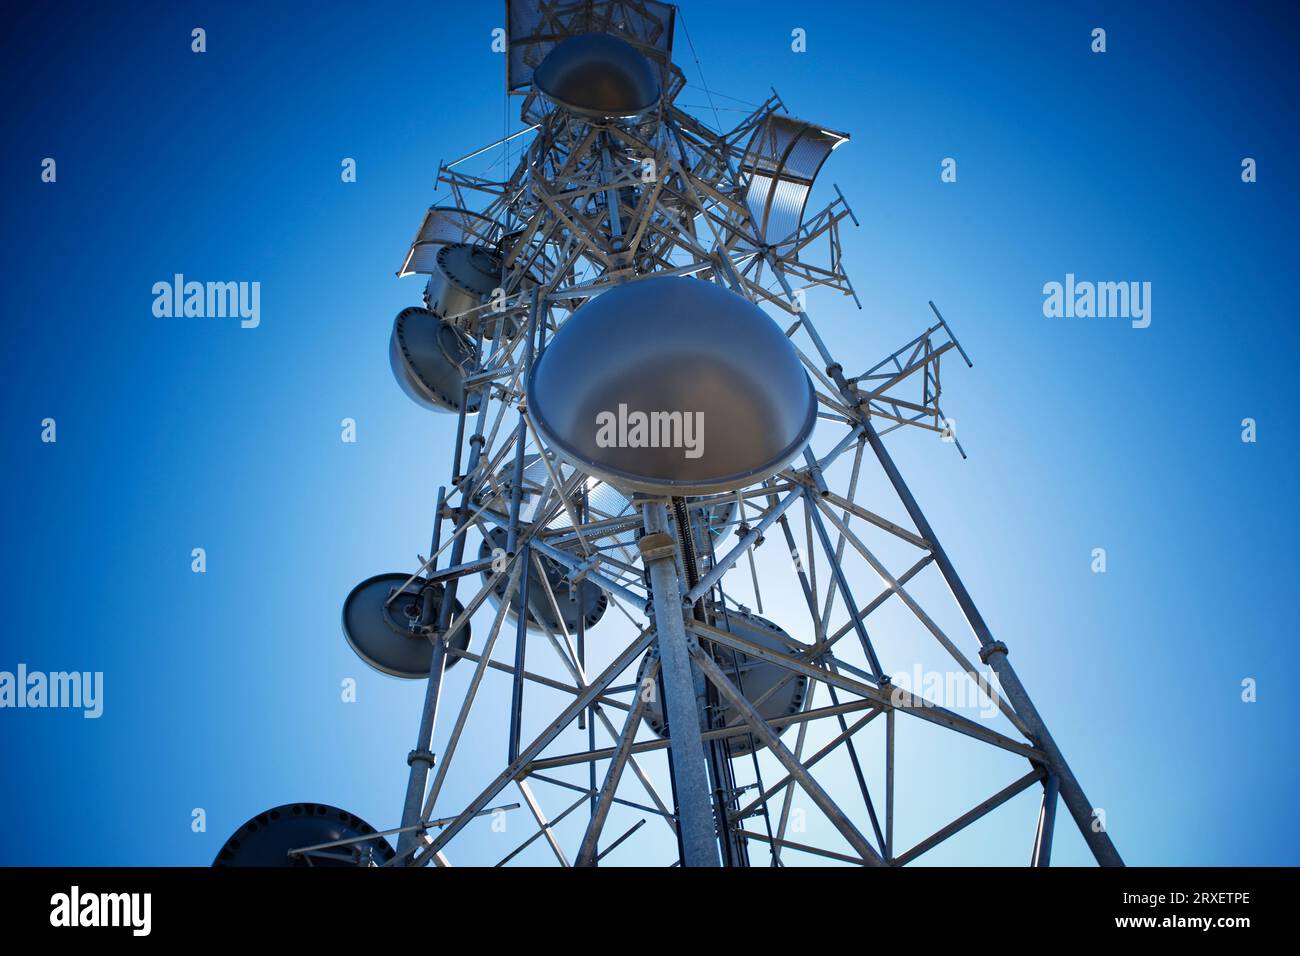 https://c8.alamy.com/comp/2RXETPE/microwave-tower-and-dishes-2RXETPE.jpg